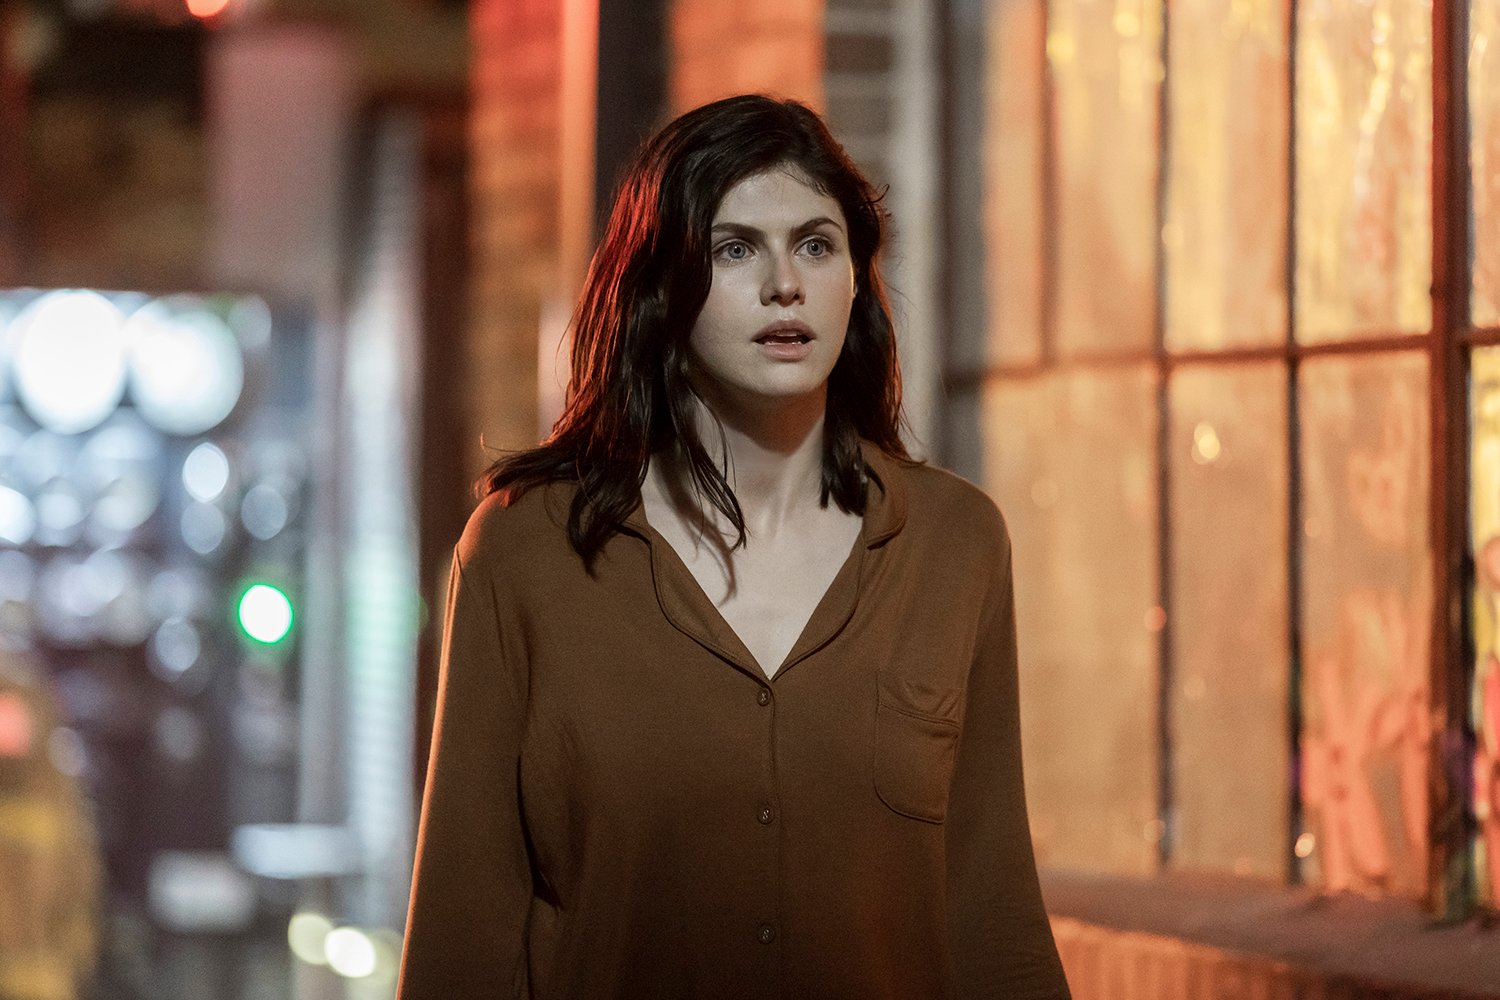 Alexandra Daddario as Dr. Rowan Fielding with a shocked expression on her face in Mayfair Witches